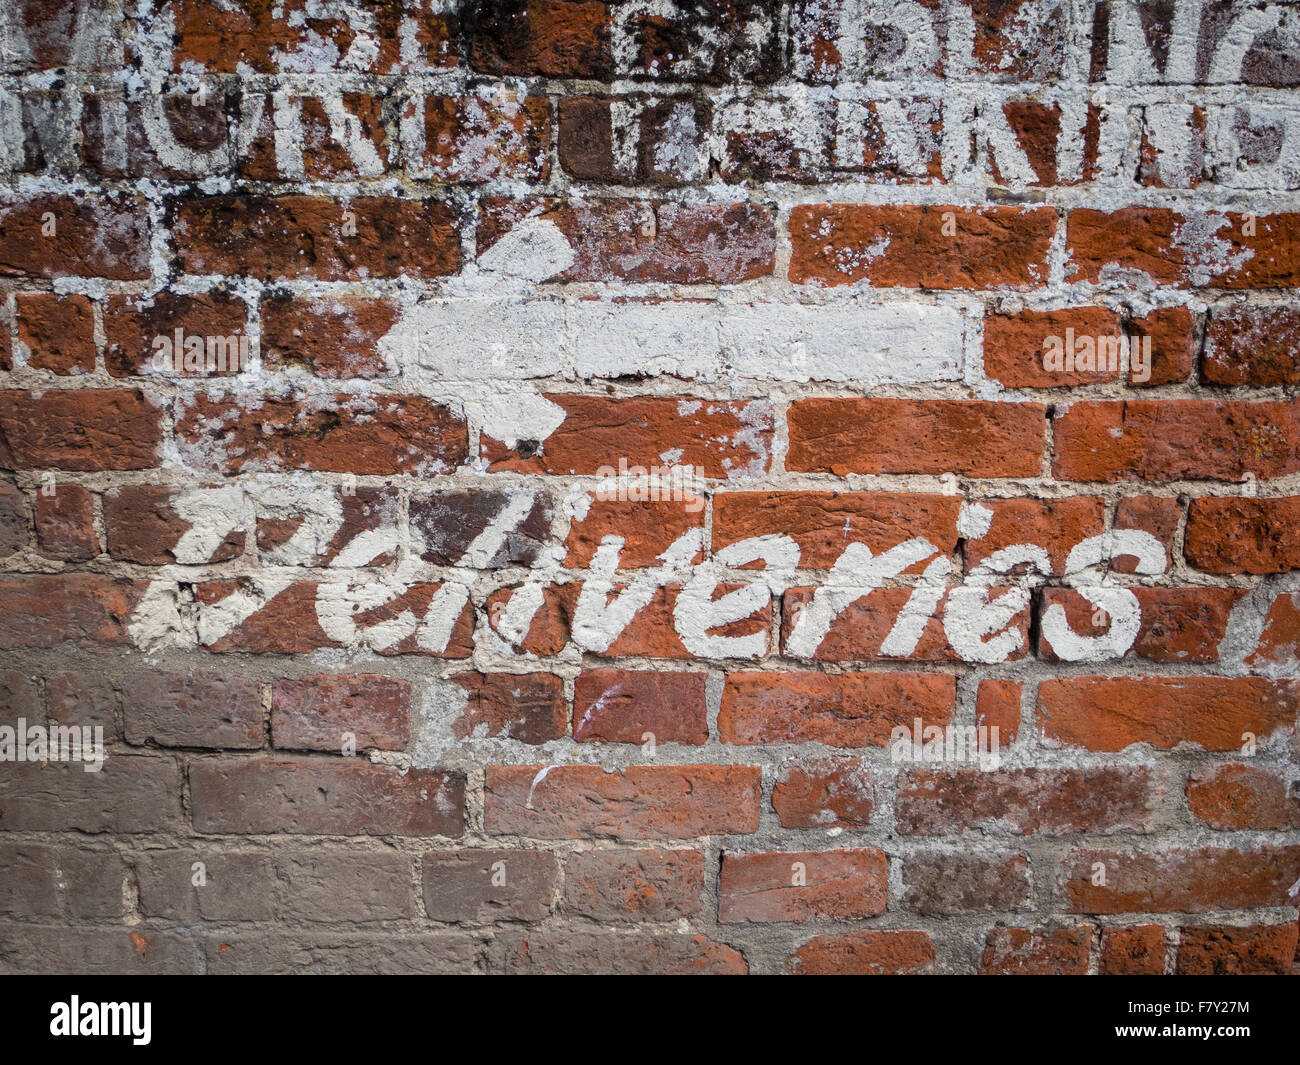 Deliveries sign Stock Photo